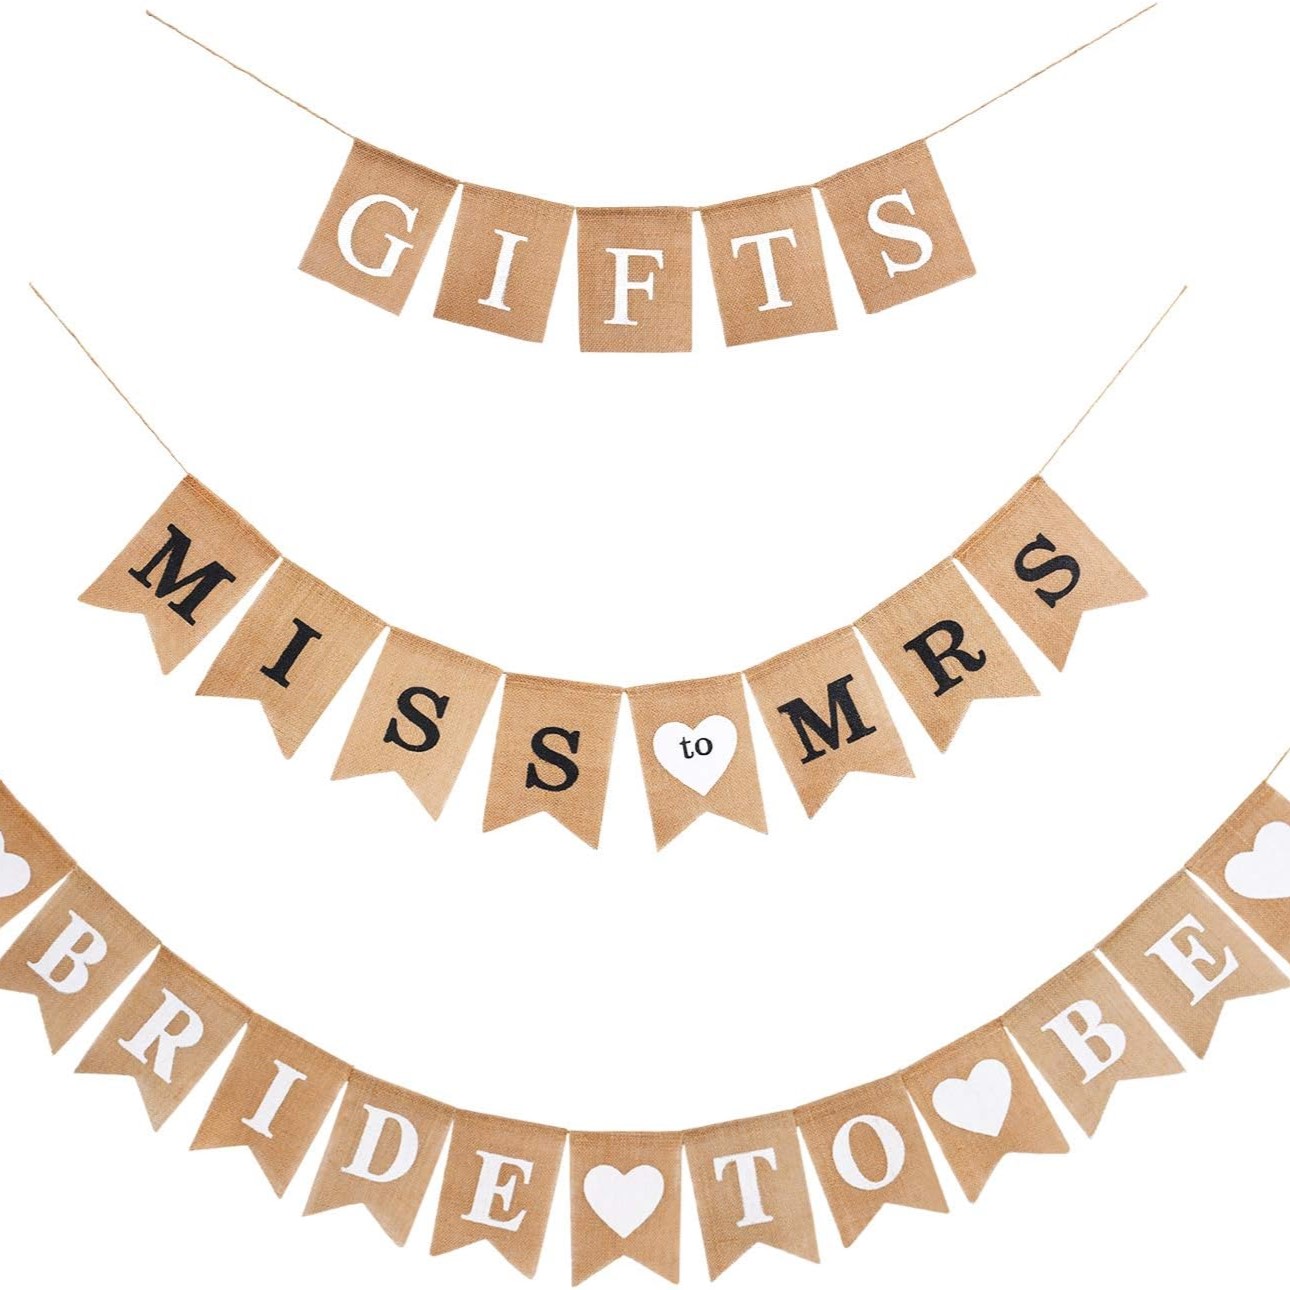 Three different wedding themed banners made of burlap flags; "Gifts," "Miss to Mrs.," and "Bride to Be."